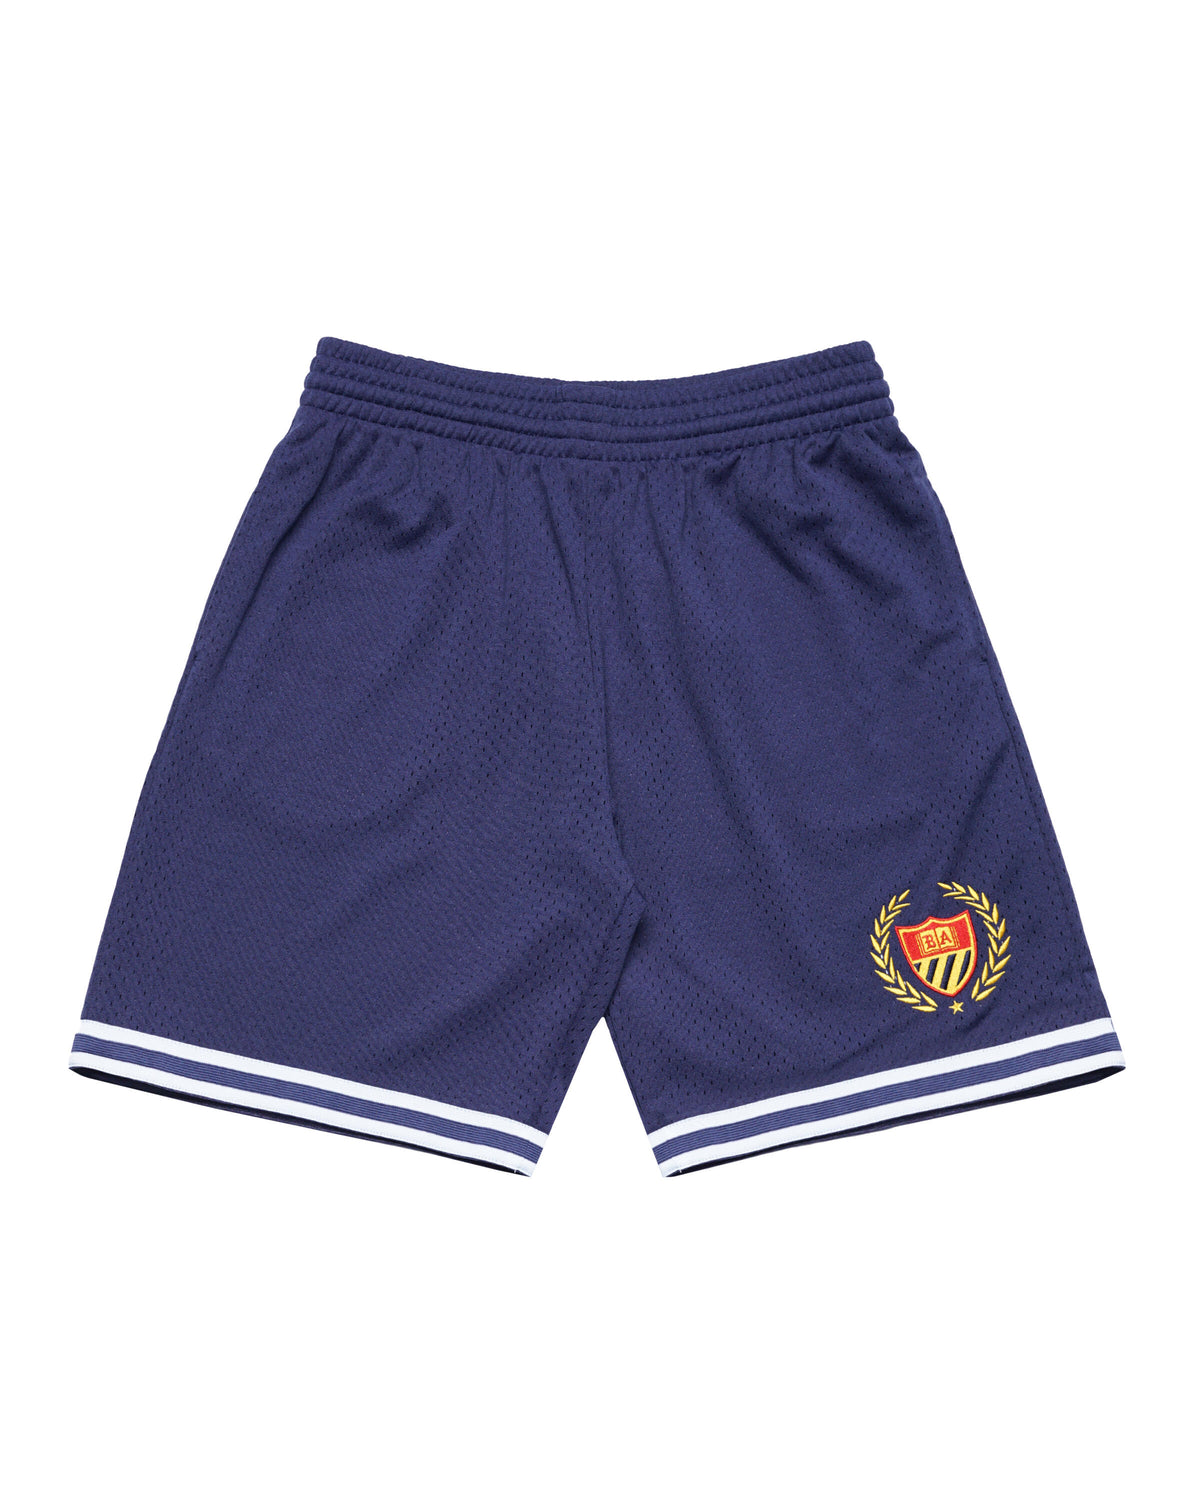 Mitchell & Ness X BEL-AIR ROAD SHORTS